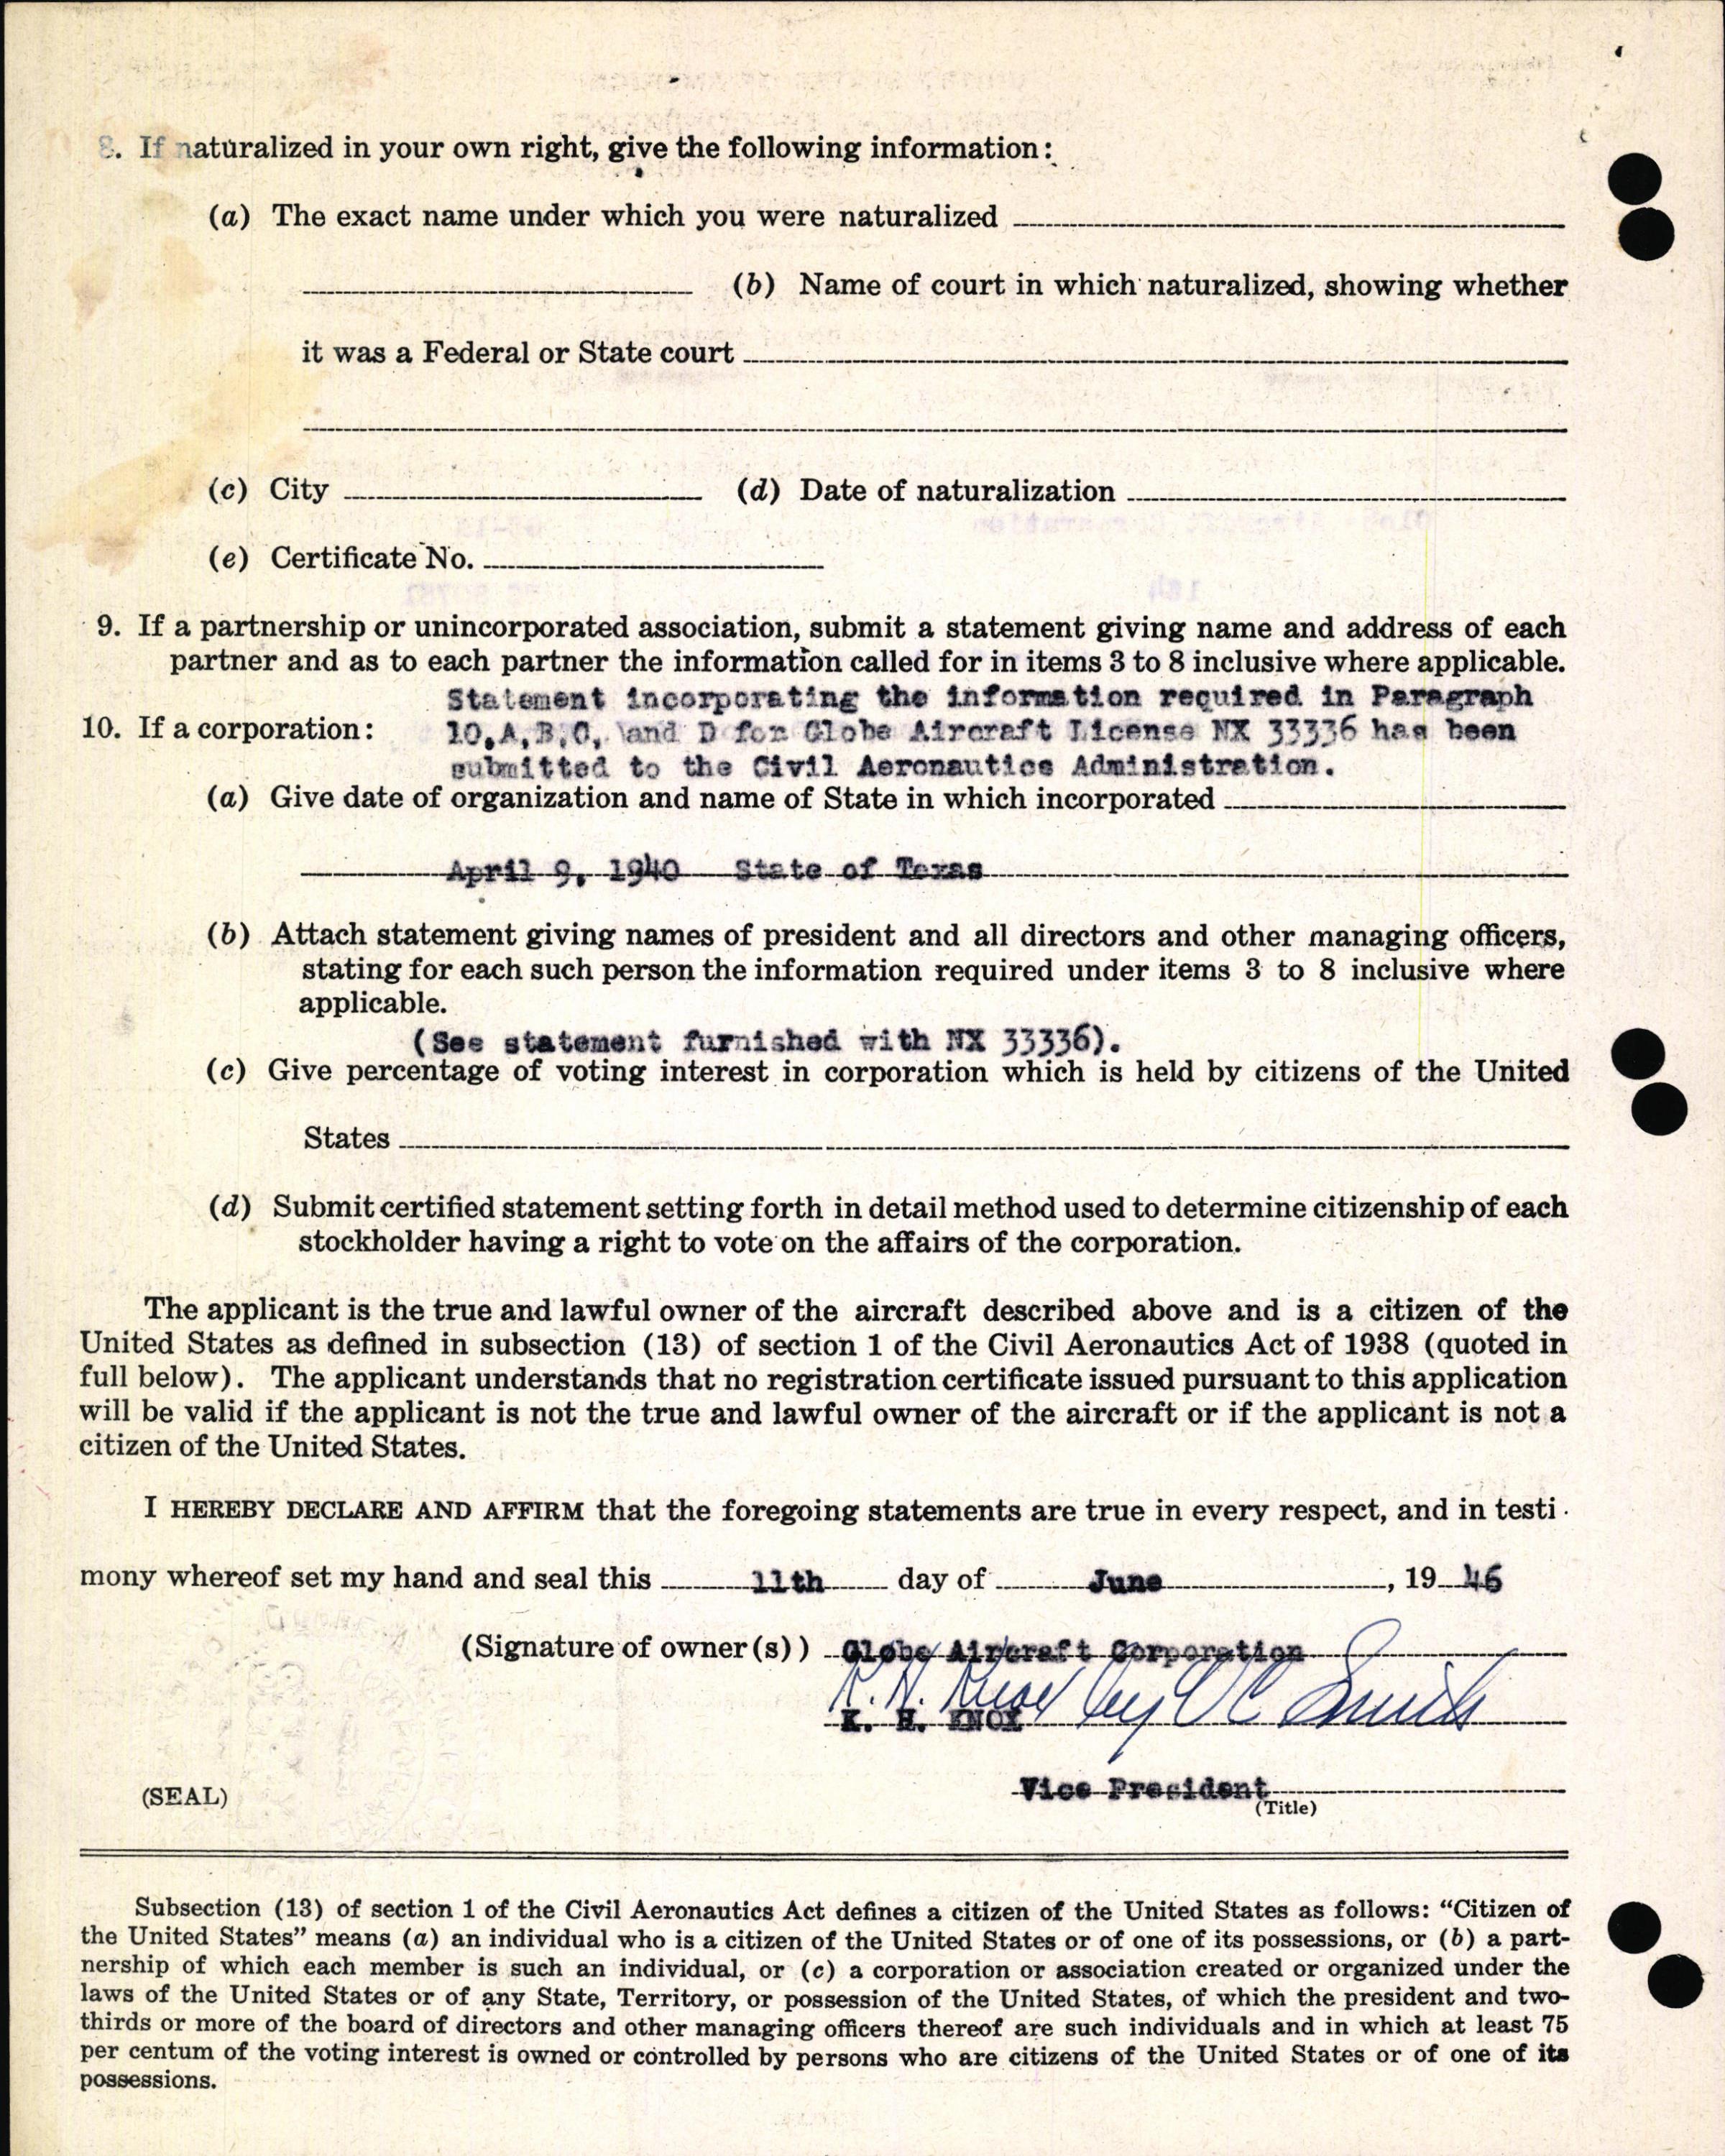 Sample page 6 from AirCorps Library document: Technical Information for Serial Number 184